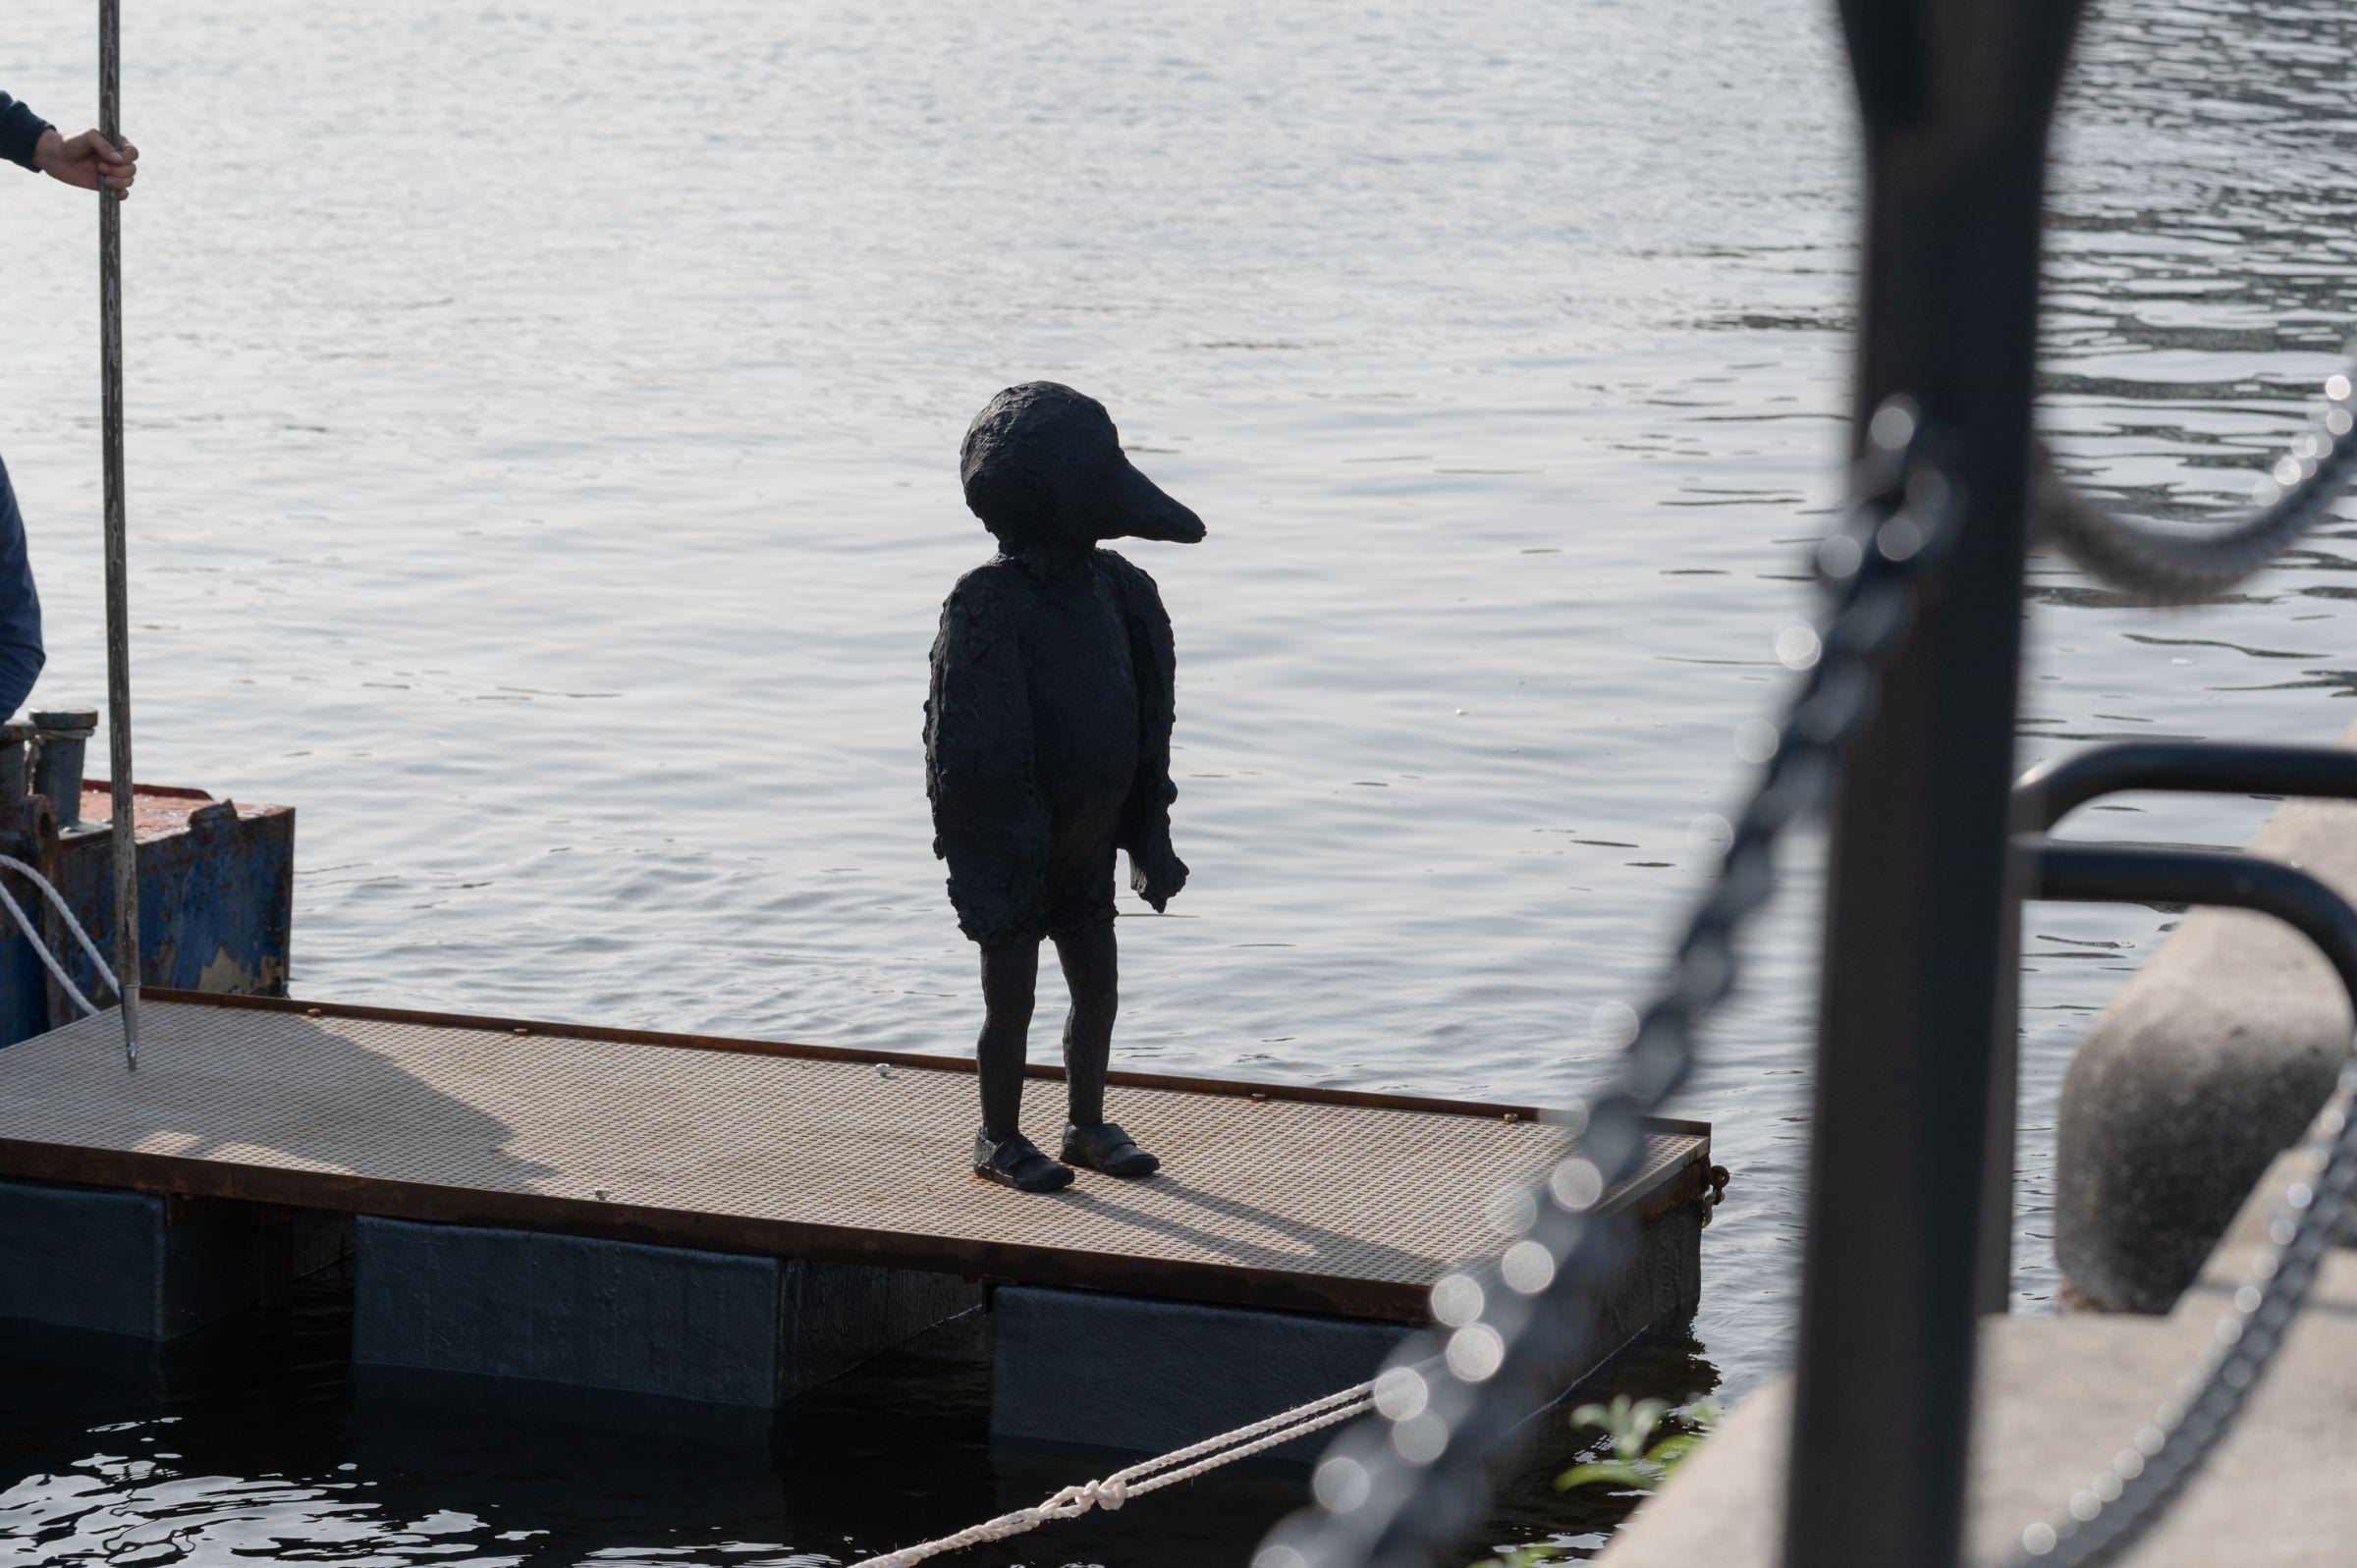 Statue that looks like a child with a bird's head, floating on a platform in the dock